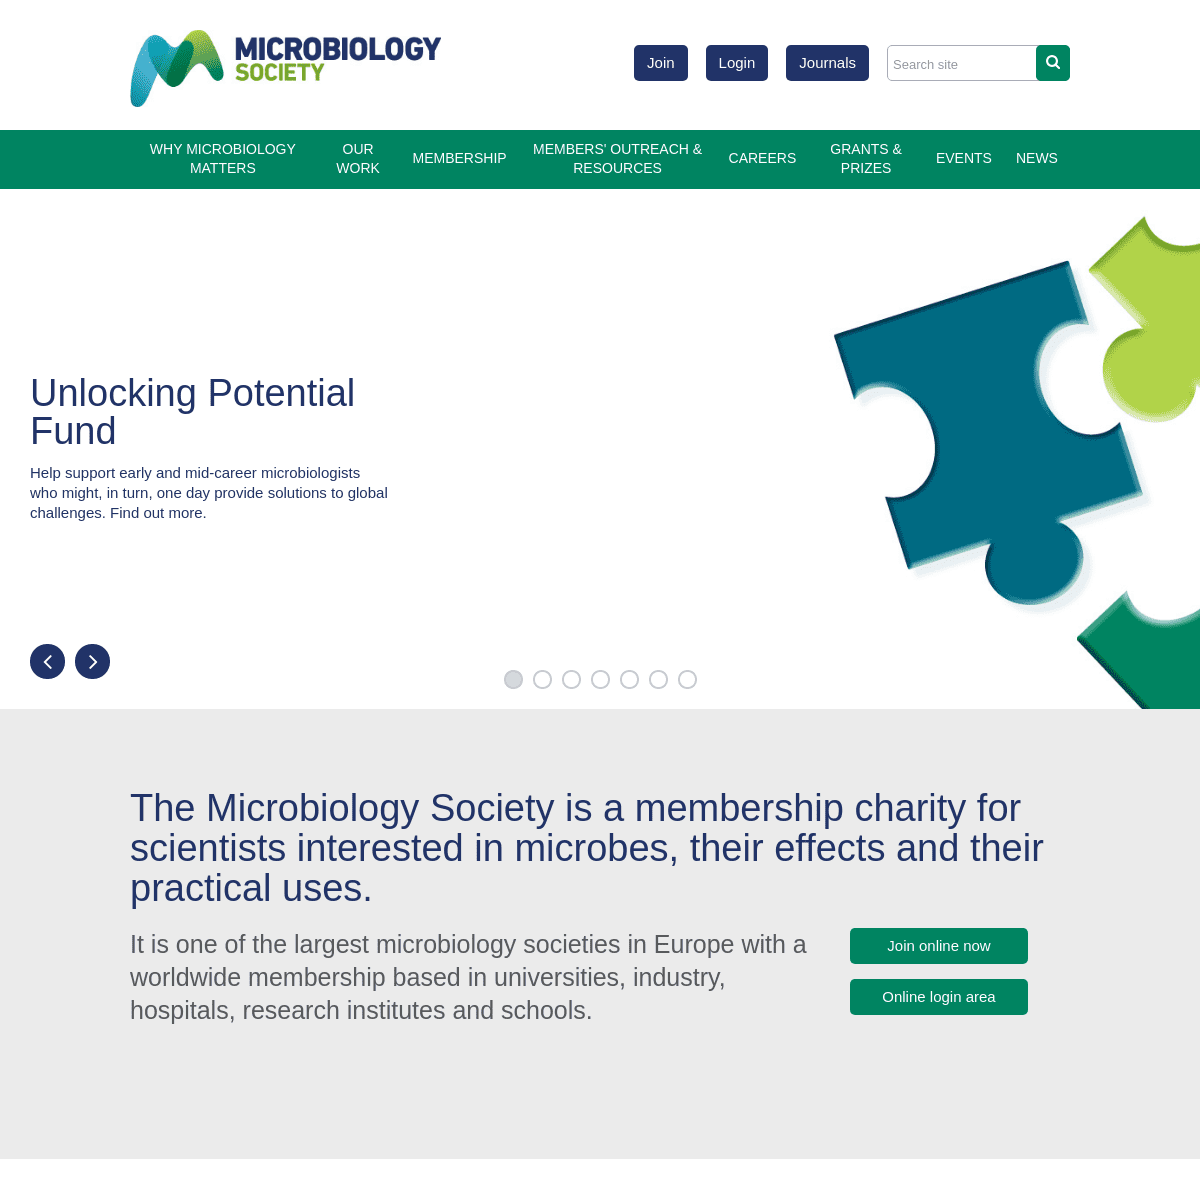 A complete backup of https://microbiologysociety.org